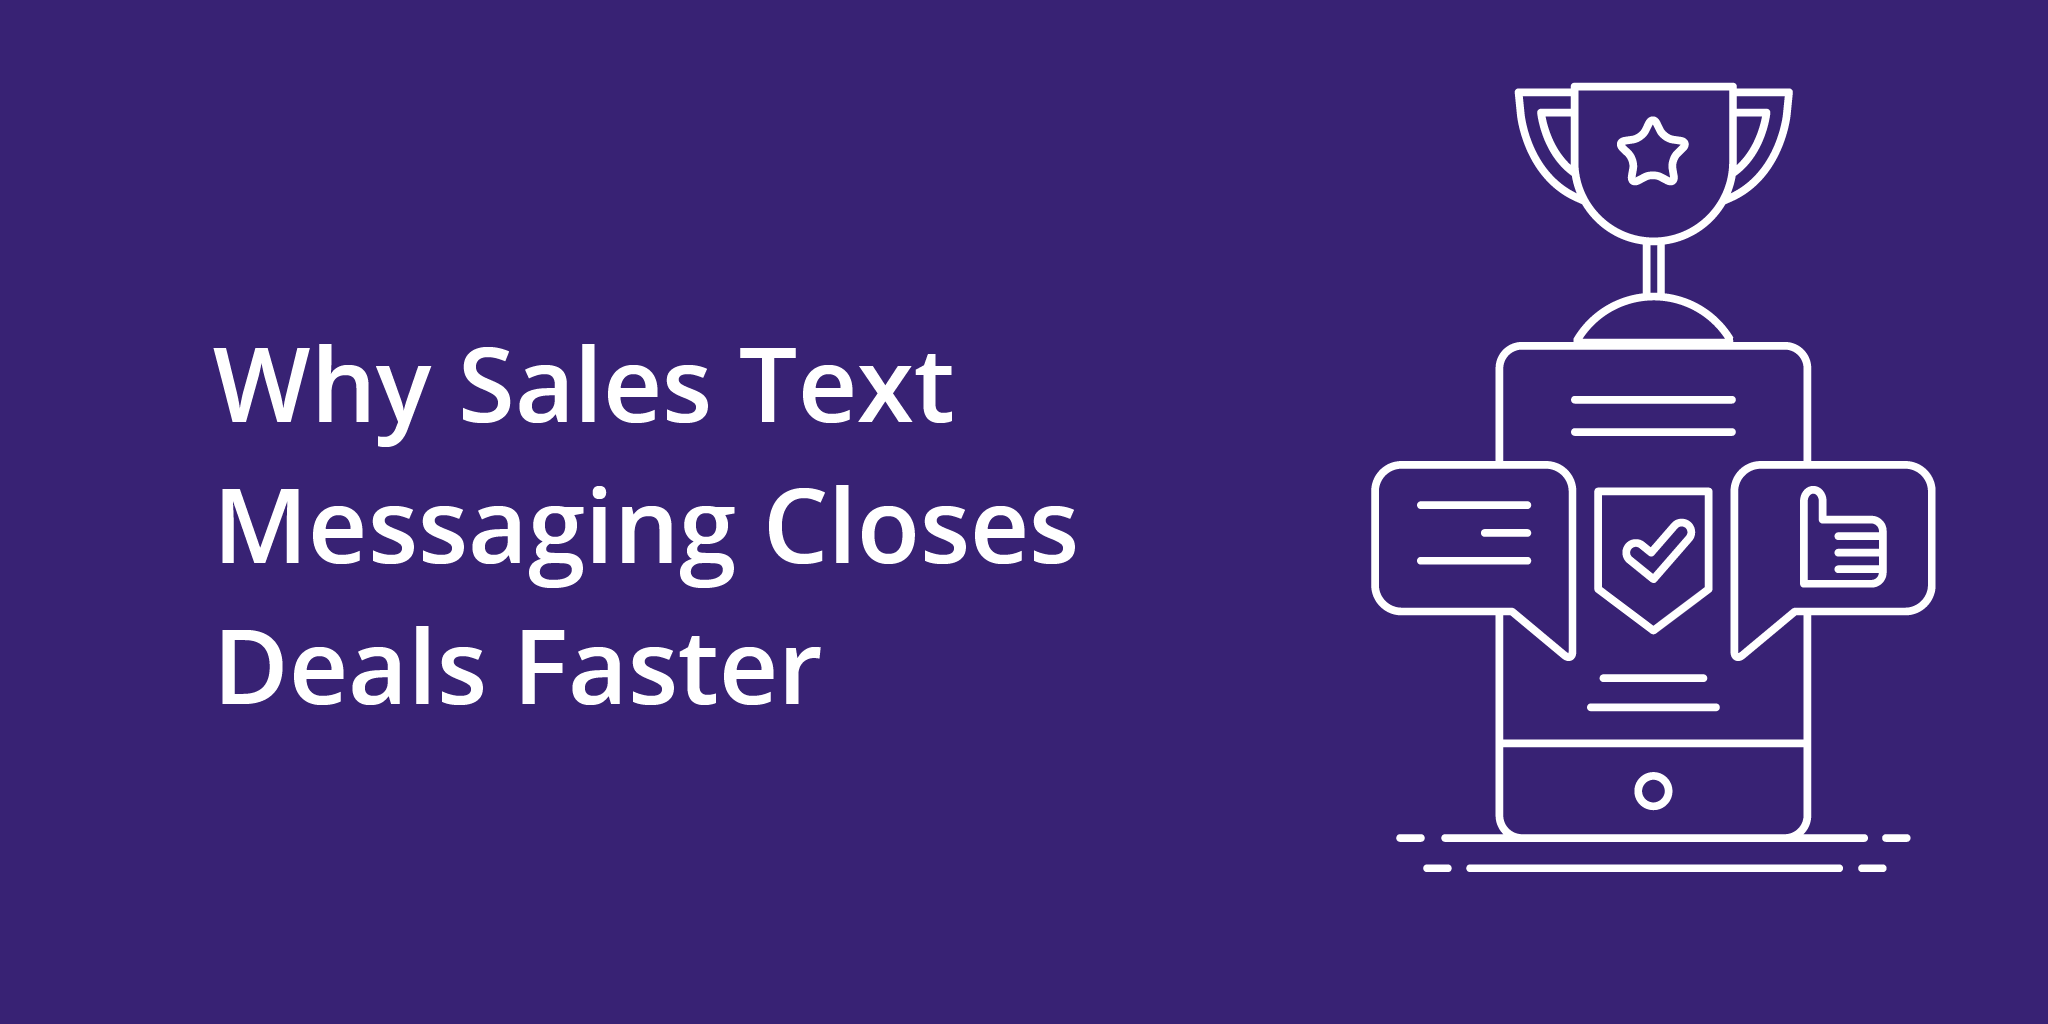 Why Sales Text Messaging Closes Deals Faster | Telephones for business